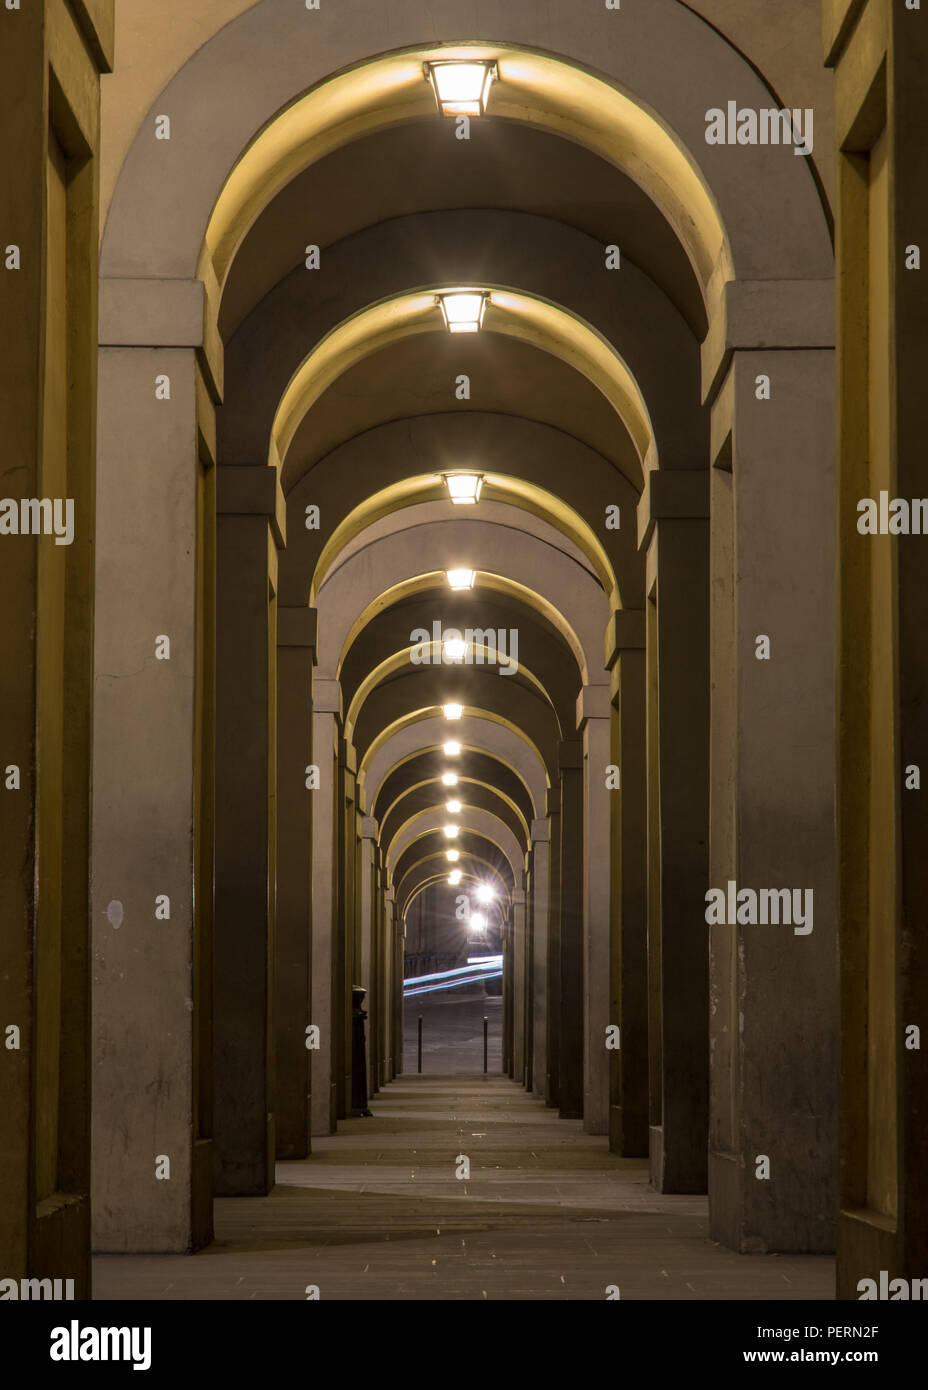 Florence, Italy - March 21, 2018: The Renaissance Vasari Corridor is lit at night in Florence. Stock Photo